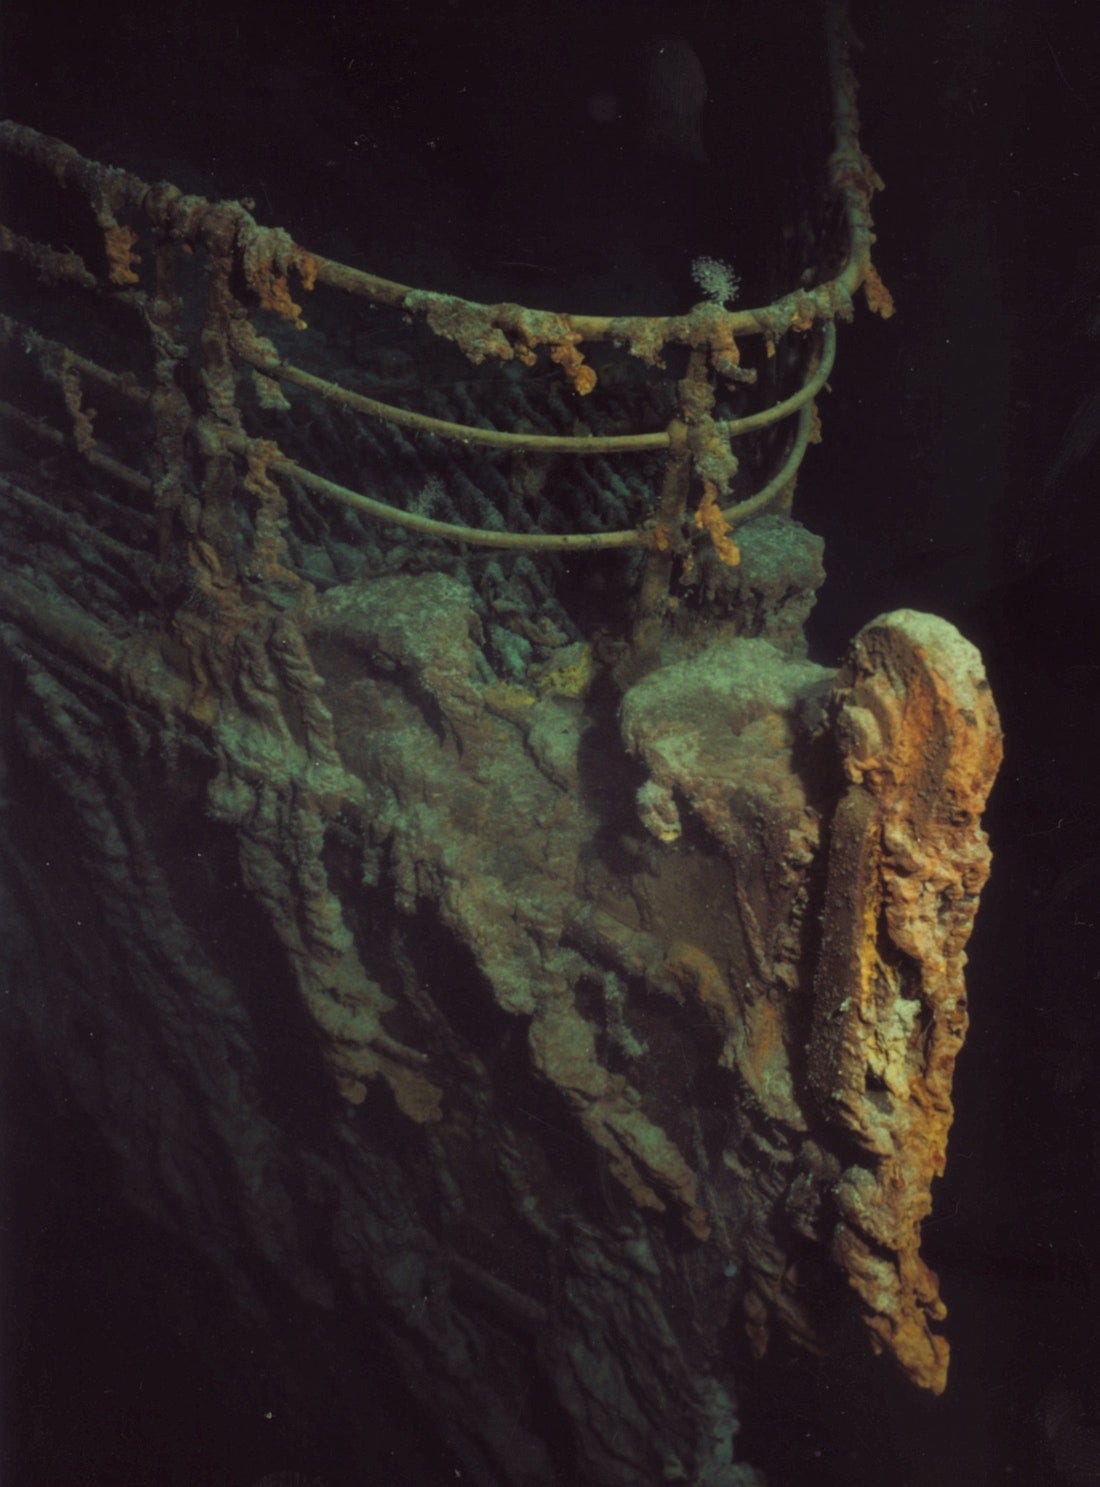 A closeup of the degraded bow of the wreck of the Titanic. It is illuminated from the front, and is a muddy brown.